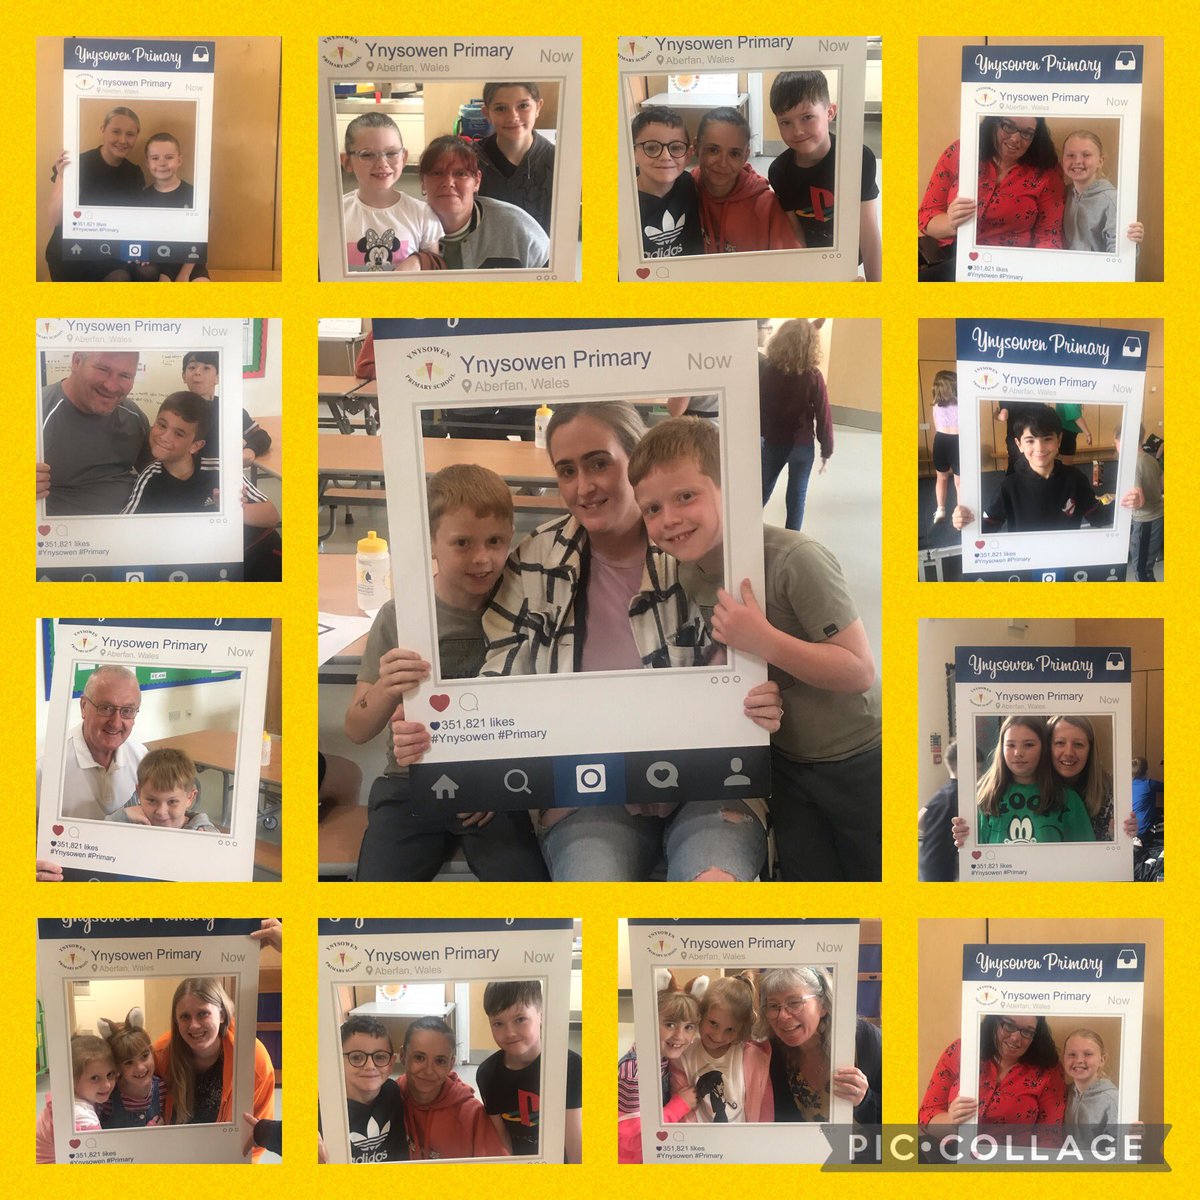 Friday’s Food and Fun. A busy day making healthy wrap pizzas 🍕, playing netball/ basketball 🏀 and making selfie frames to promote healthy eating 🍎🍌🍓😊@JanineBrill @ShelleyPowellRD @MerthyrCBC @CTMUHBDietetics